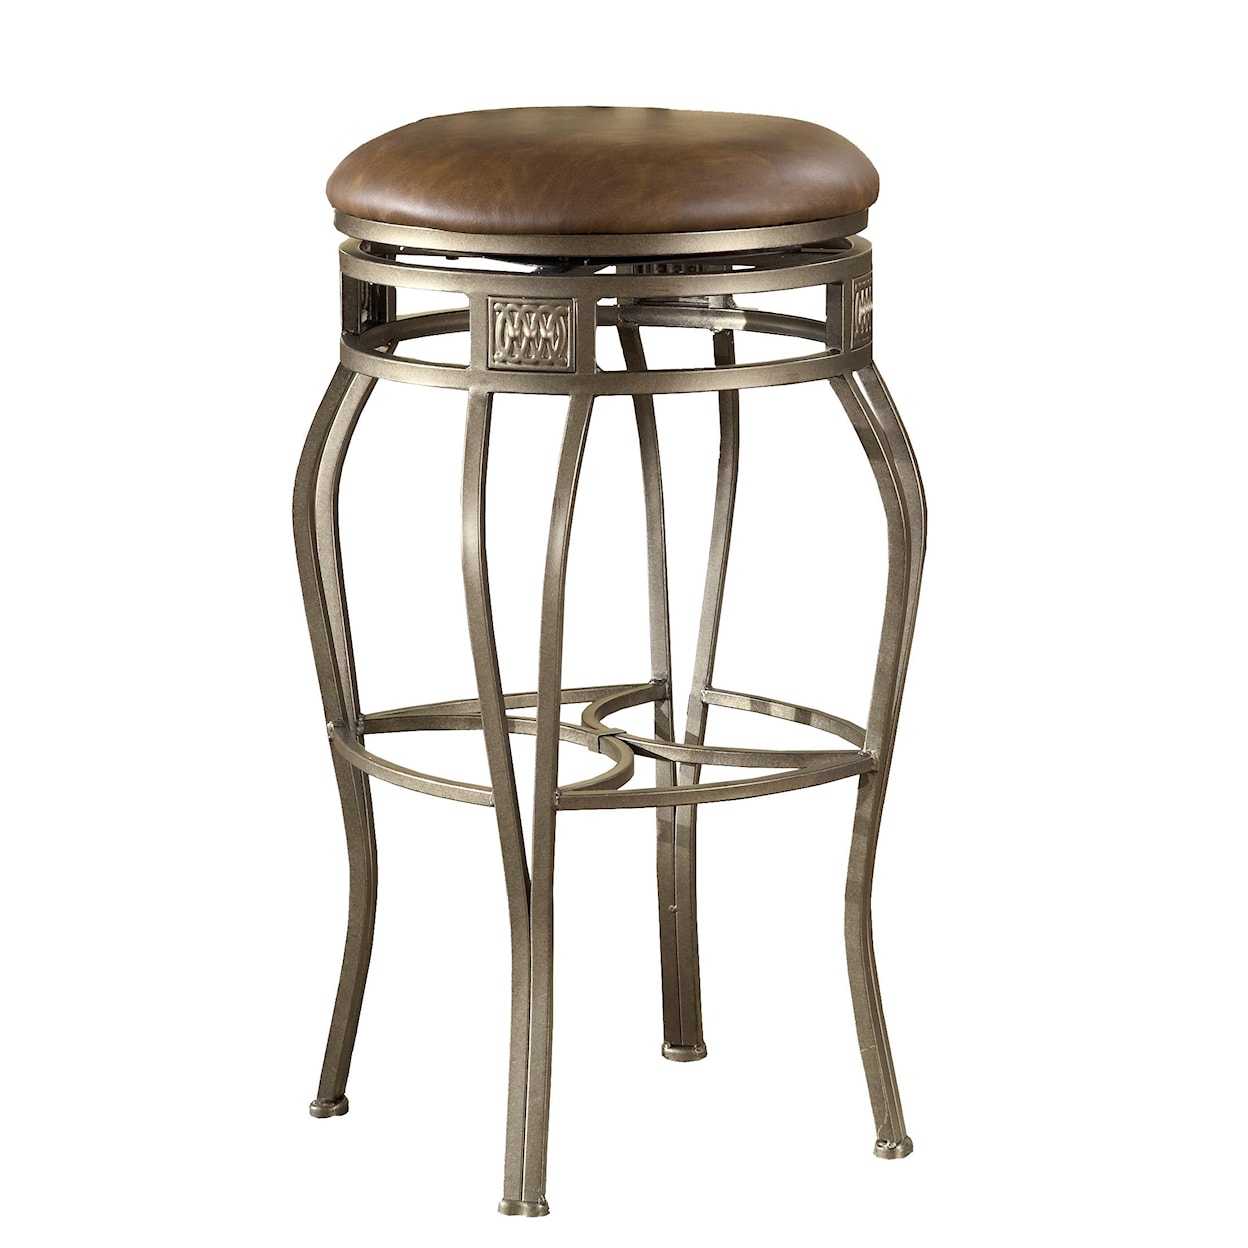 Hillsdale Backless Bar Stools 26" Backless Montello Swivel Counter Stool